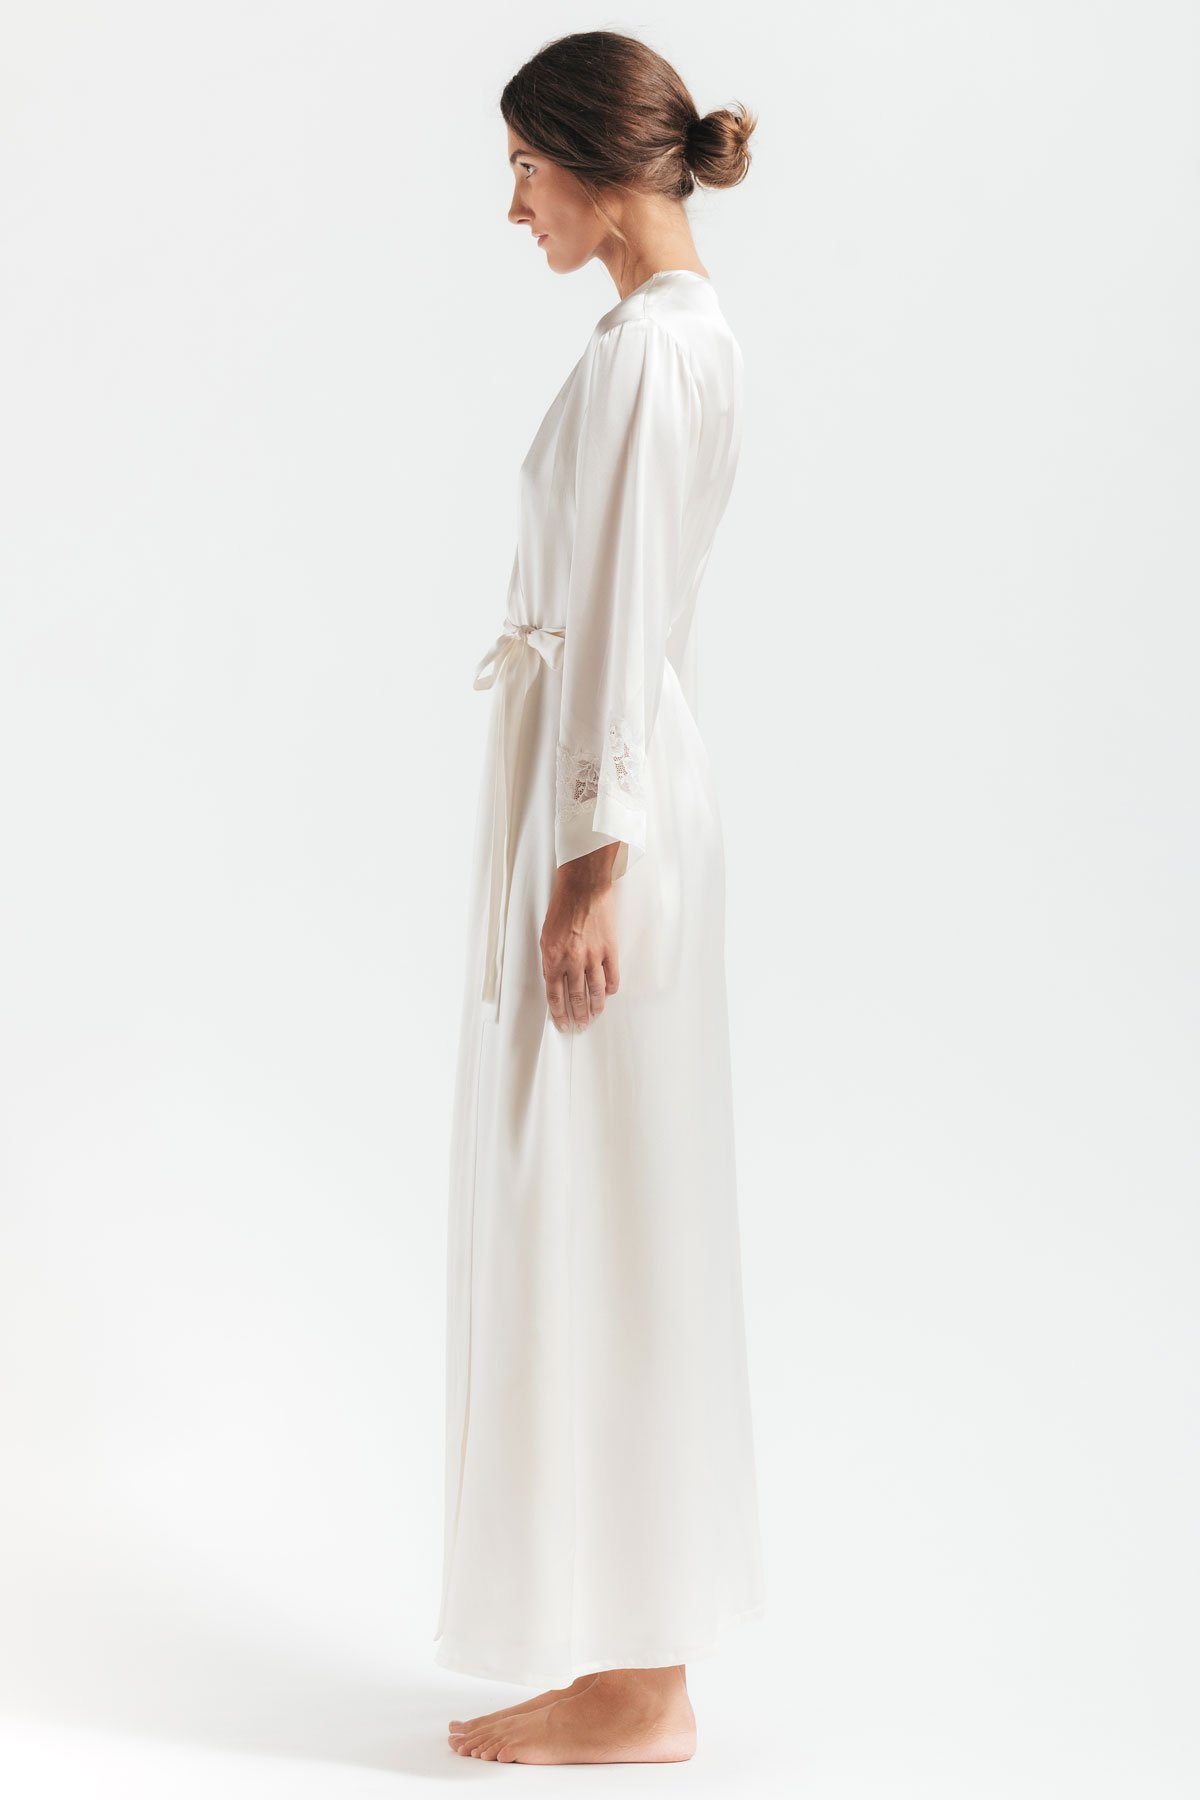 Sideview of model wearing  Morgan Long white silk robe in ivory